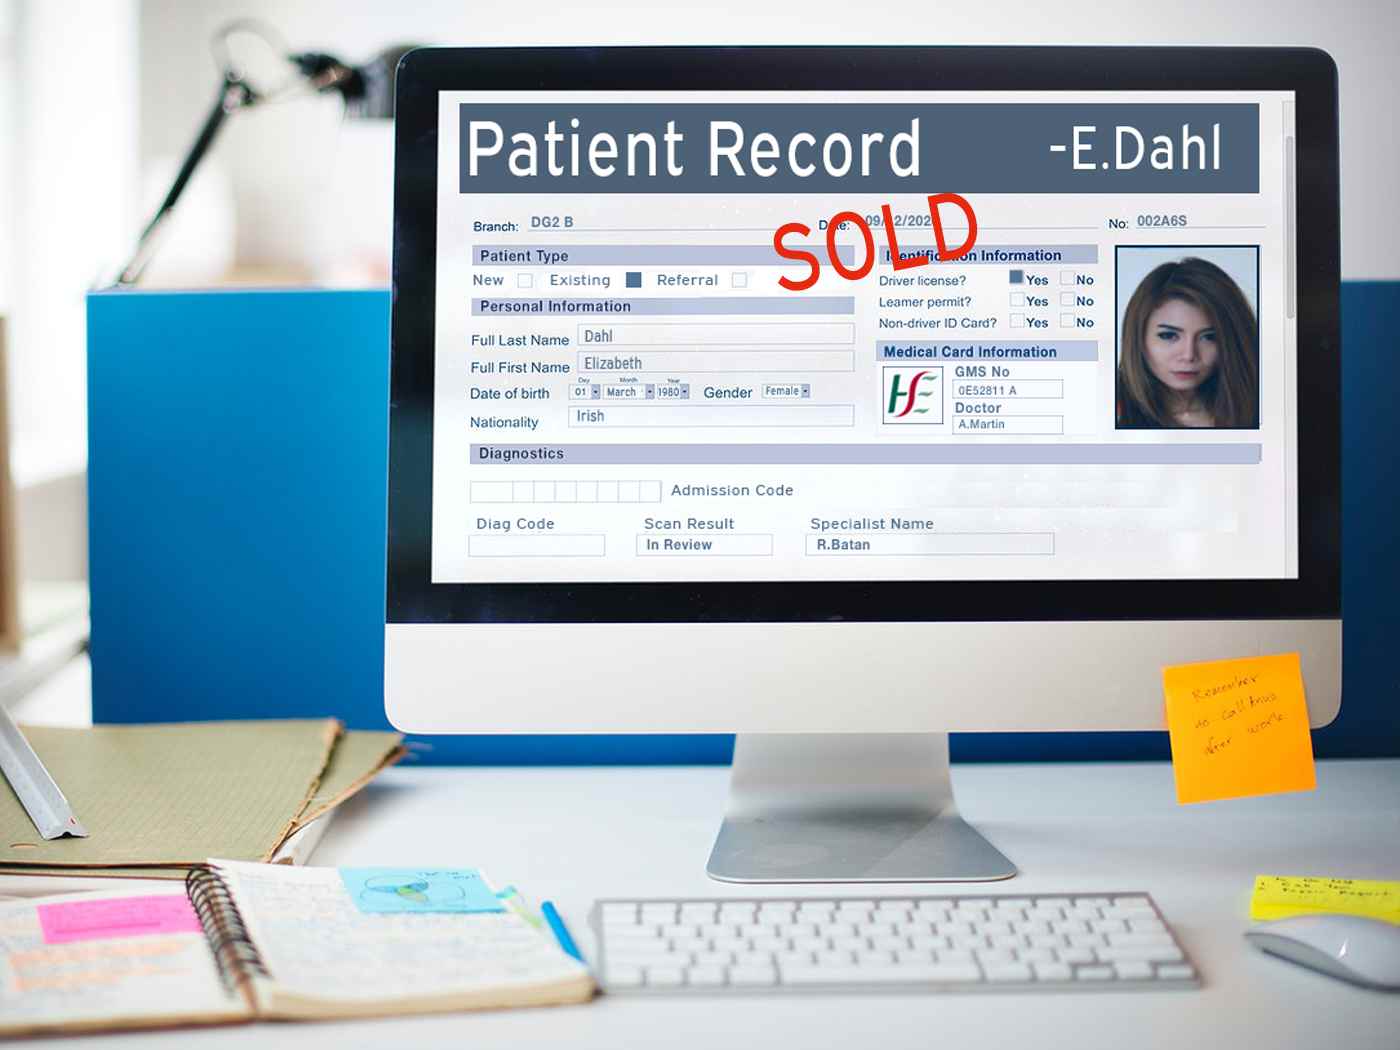 An image depicting a patient record with personal data which is being sold by data brokers to the highest bidder